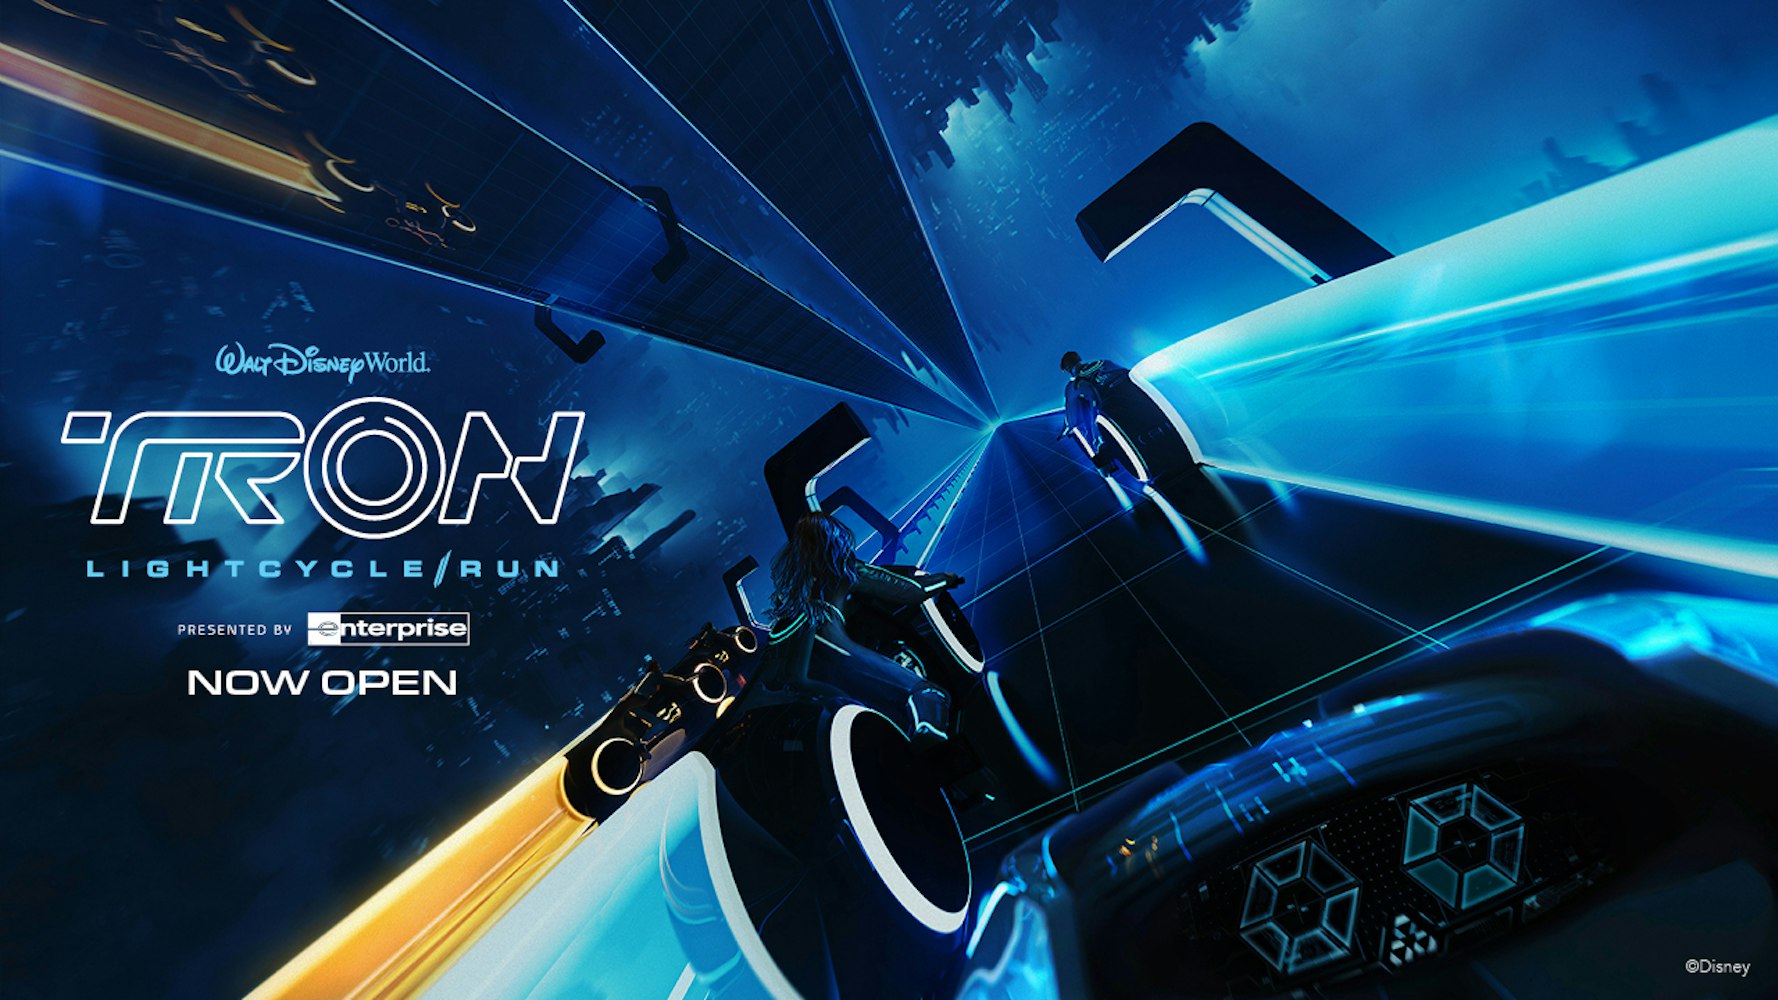 Cover Image for TRON Lightcycle / Run at Magic Kingdom